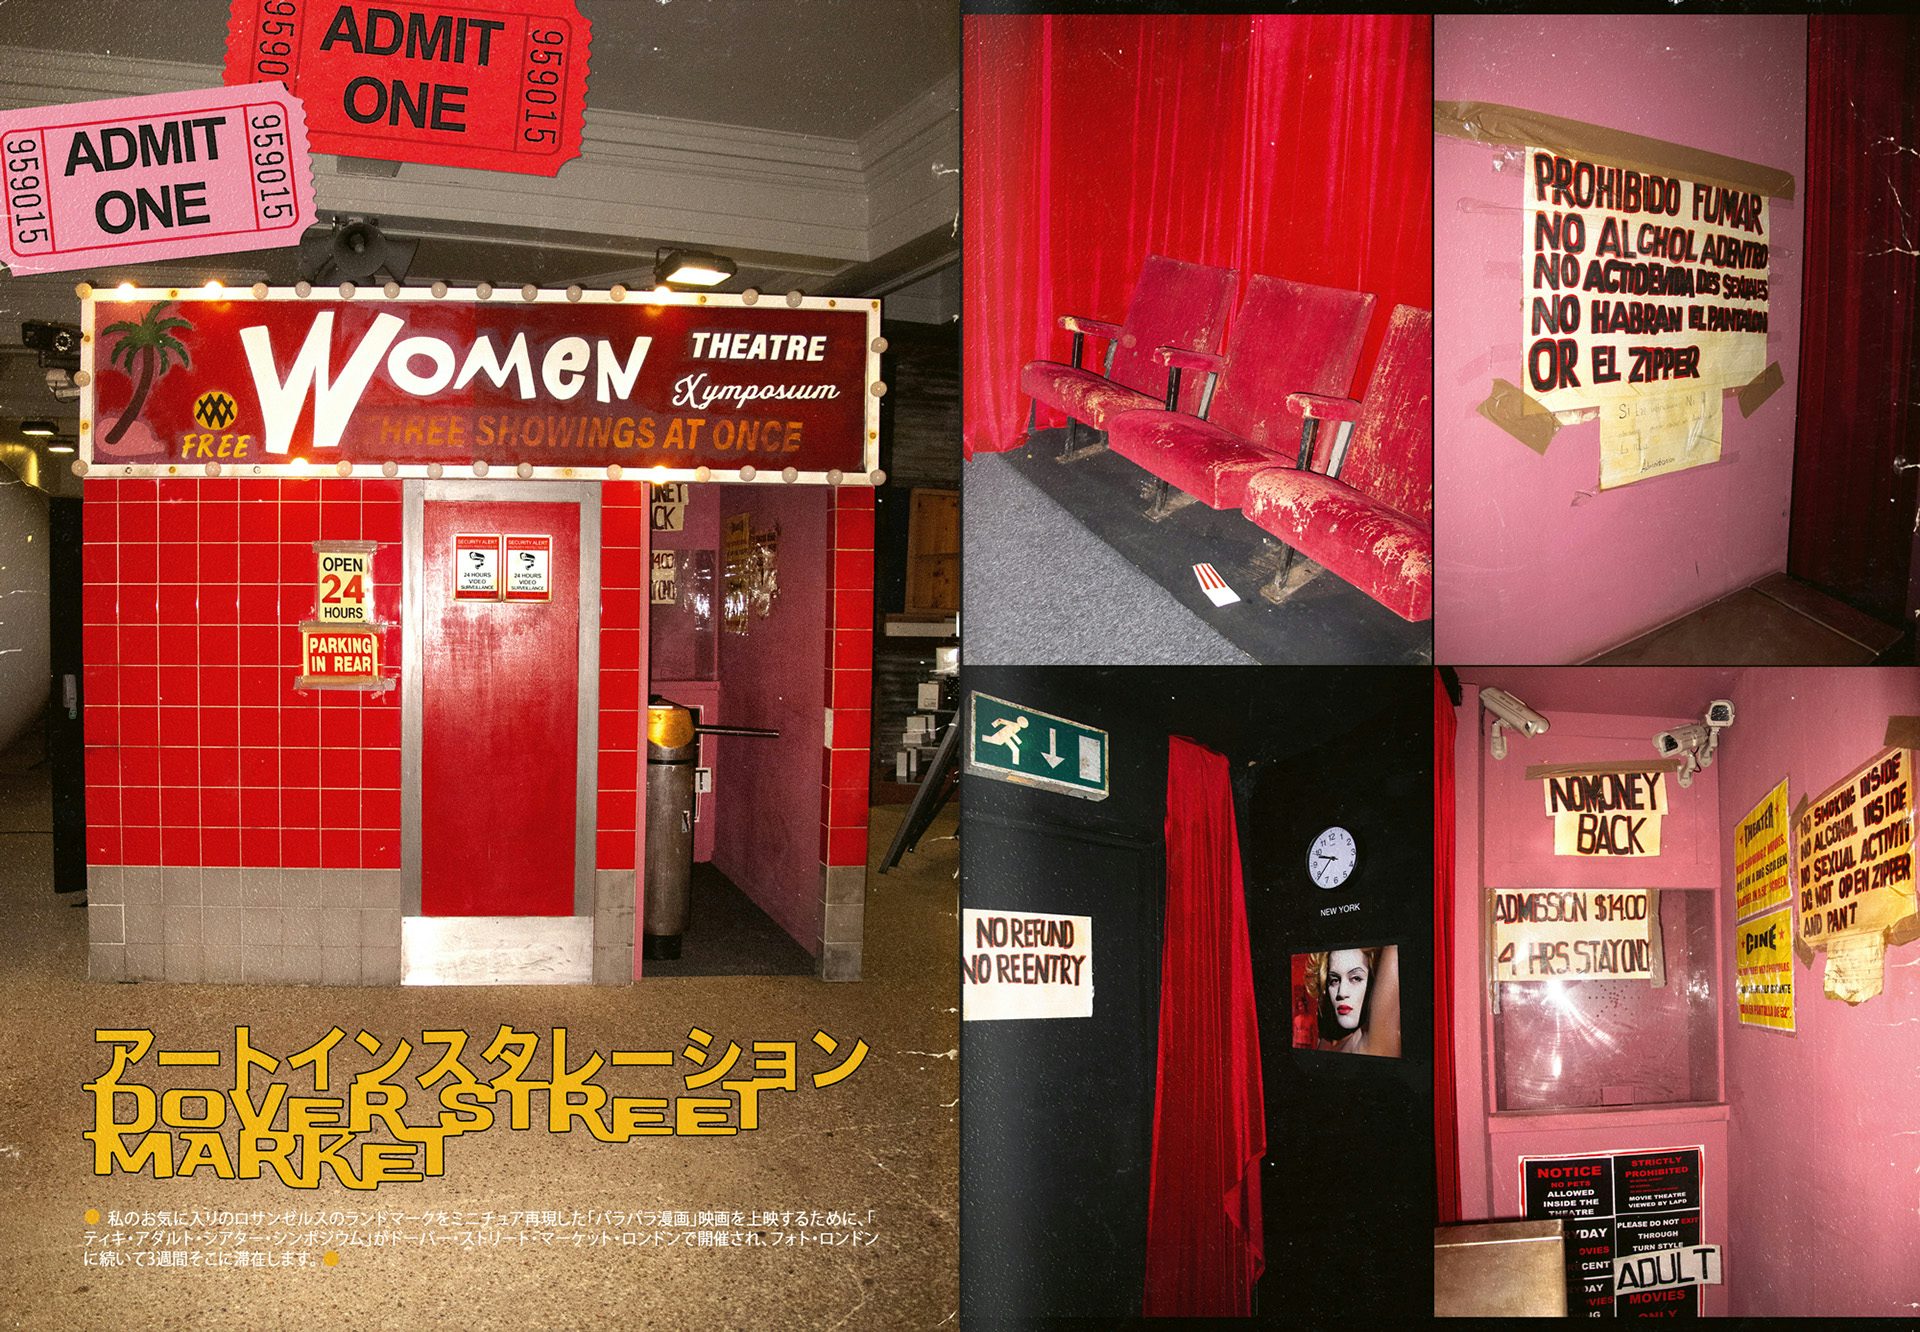 Spread from Women by Nadia Lee Cohen showing a picture of a red tiled entrance signposted 'Women', and photographs of inside the venue with stained seats and various posters